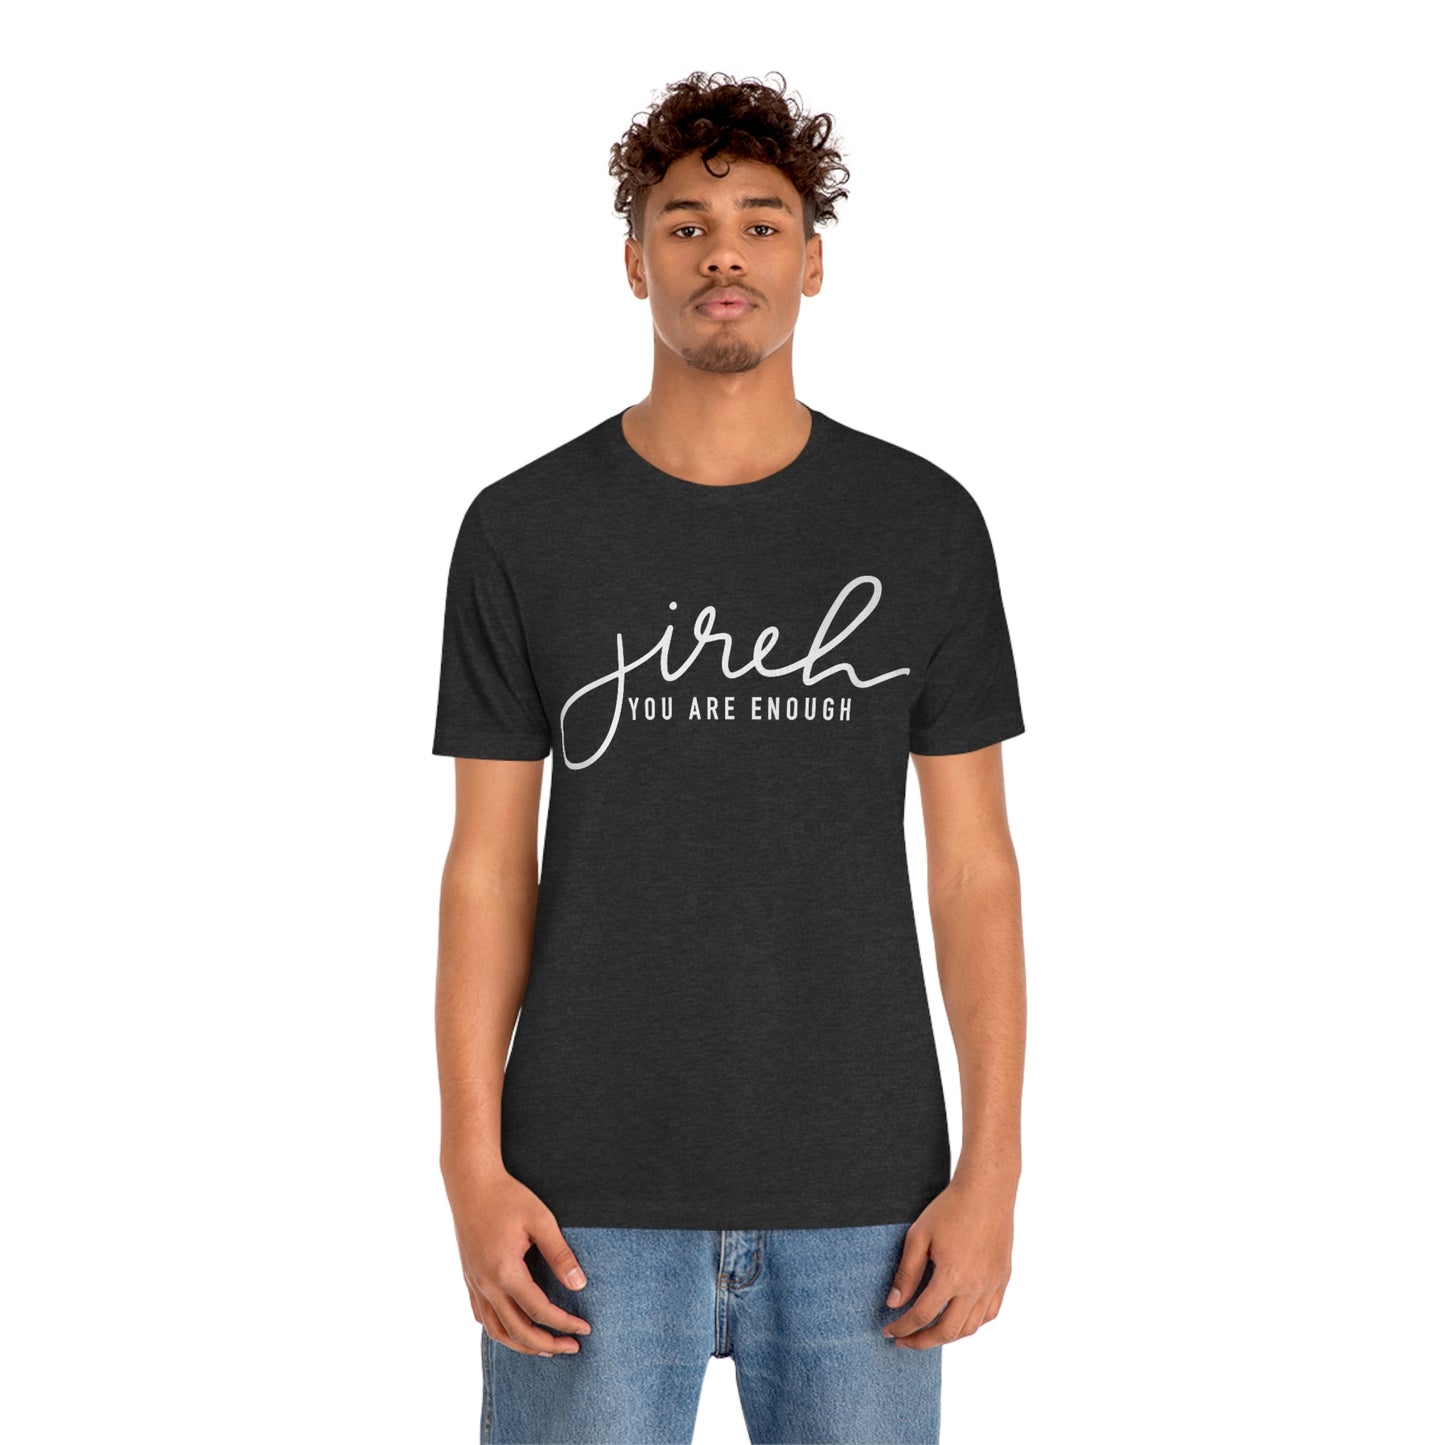 Jireh You Are Enough  Unisex Jersey Short Sleeve Tee